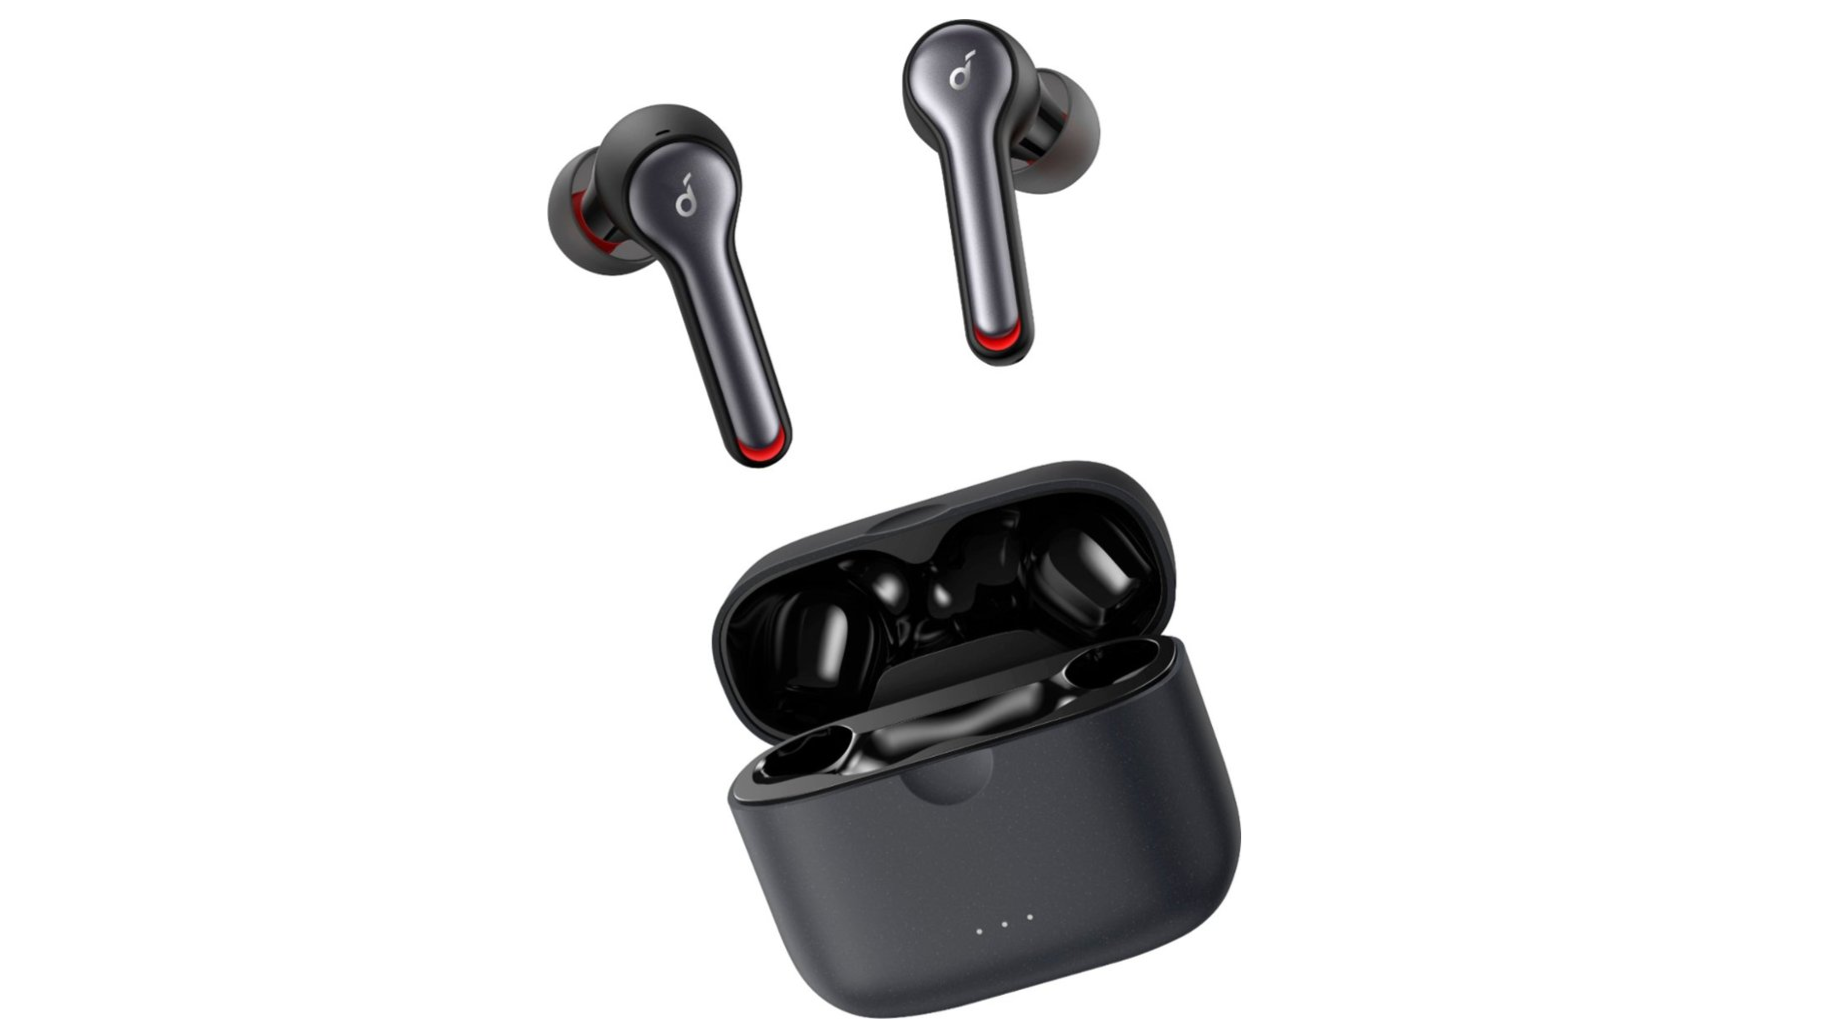 Anker's Soundcore Liberty Air 2 wireless earbuds are $80 ($20 off